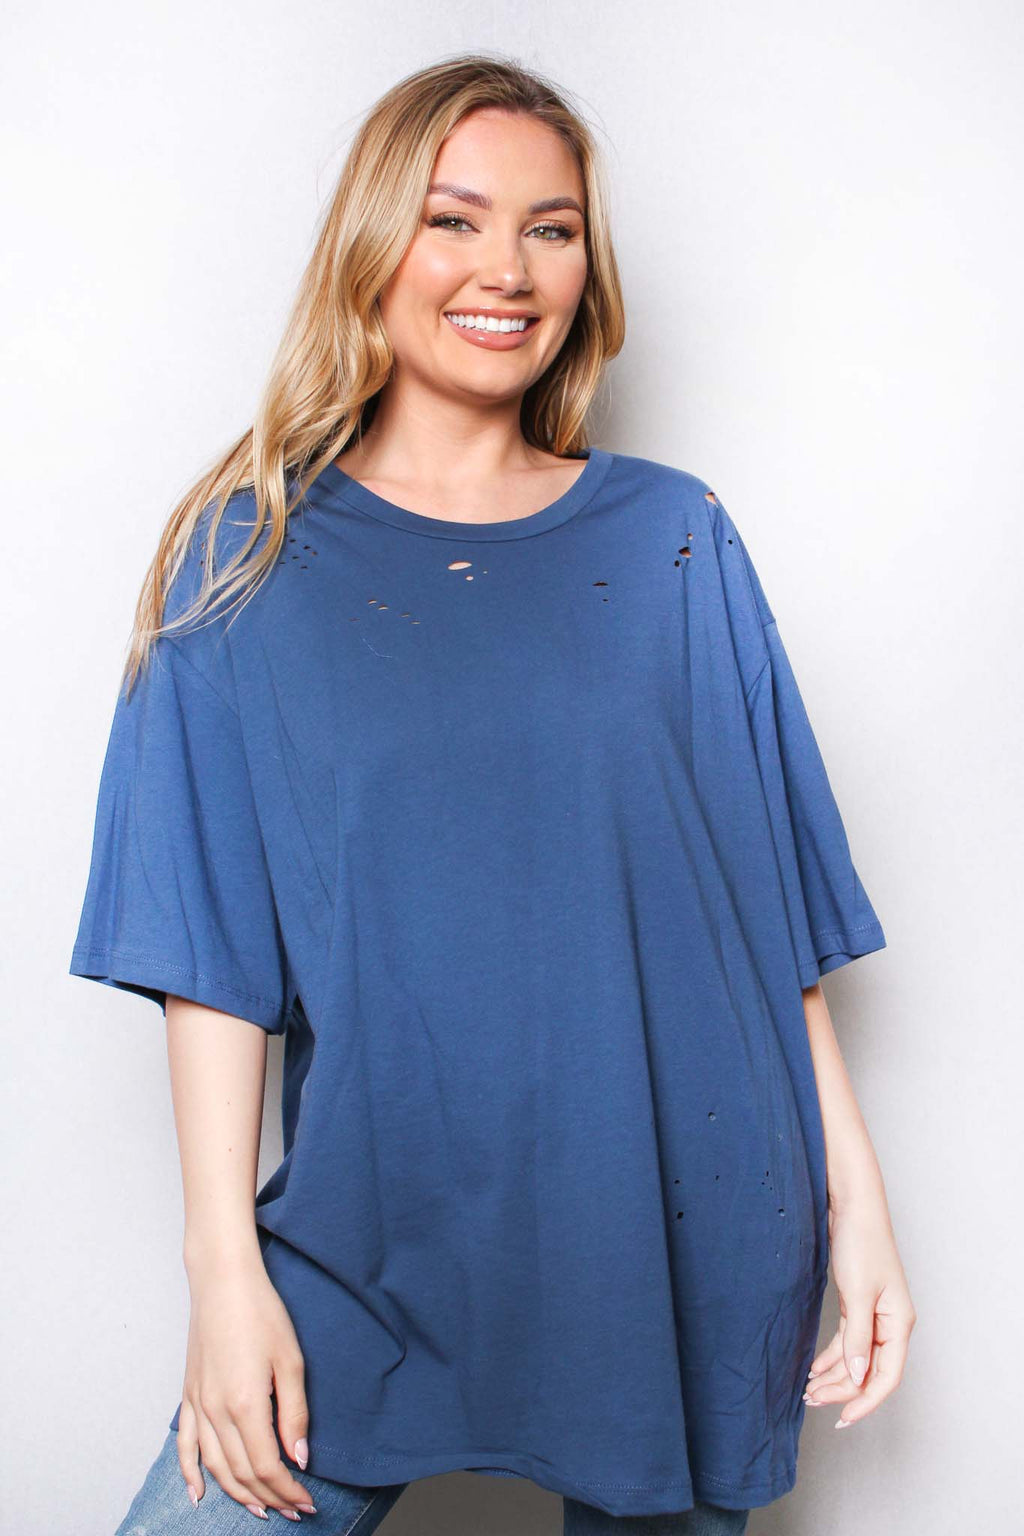 Women's Elbow Sleeve Round Neck Solid Top with Holes